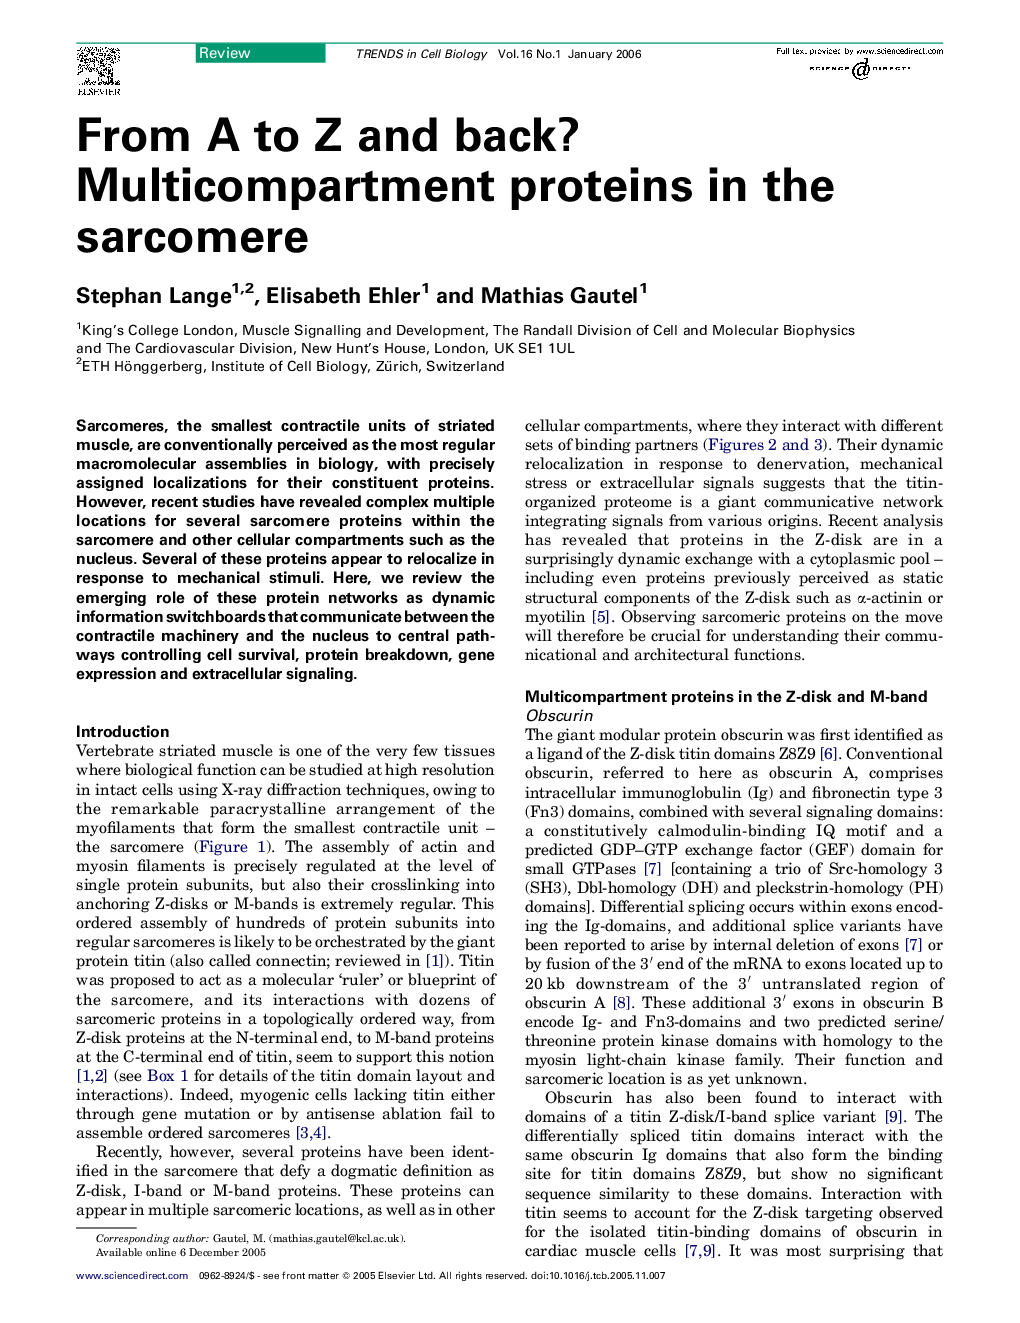 From A to Z and back? Multicompartment proteins in the sarcomere